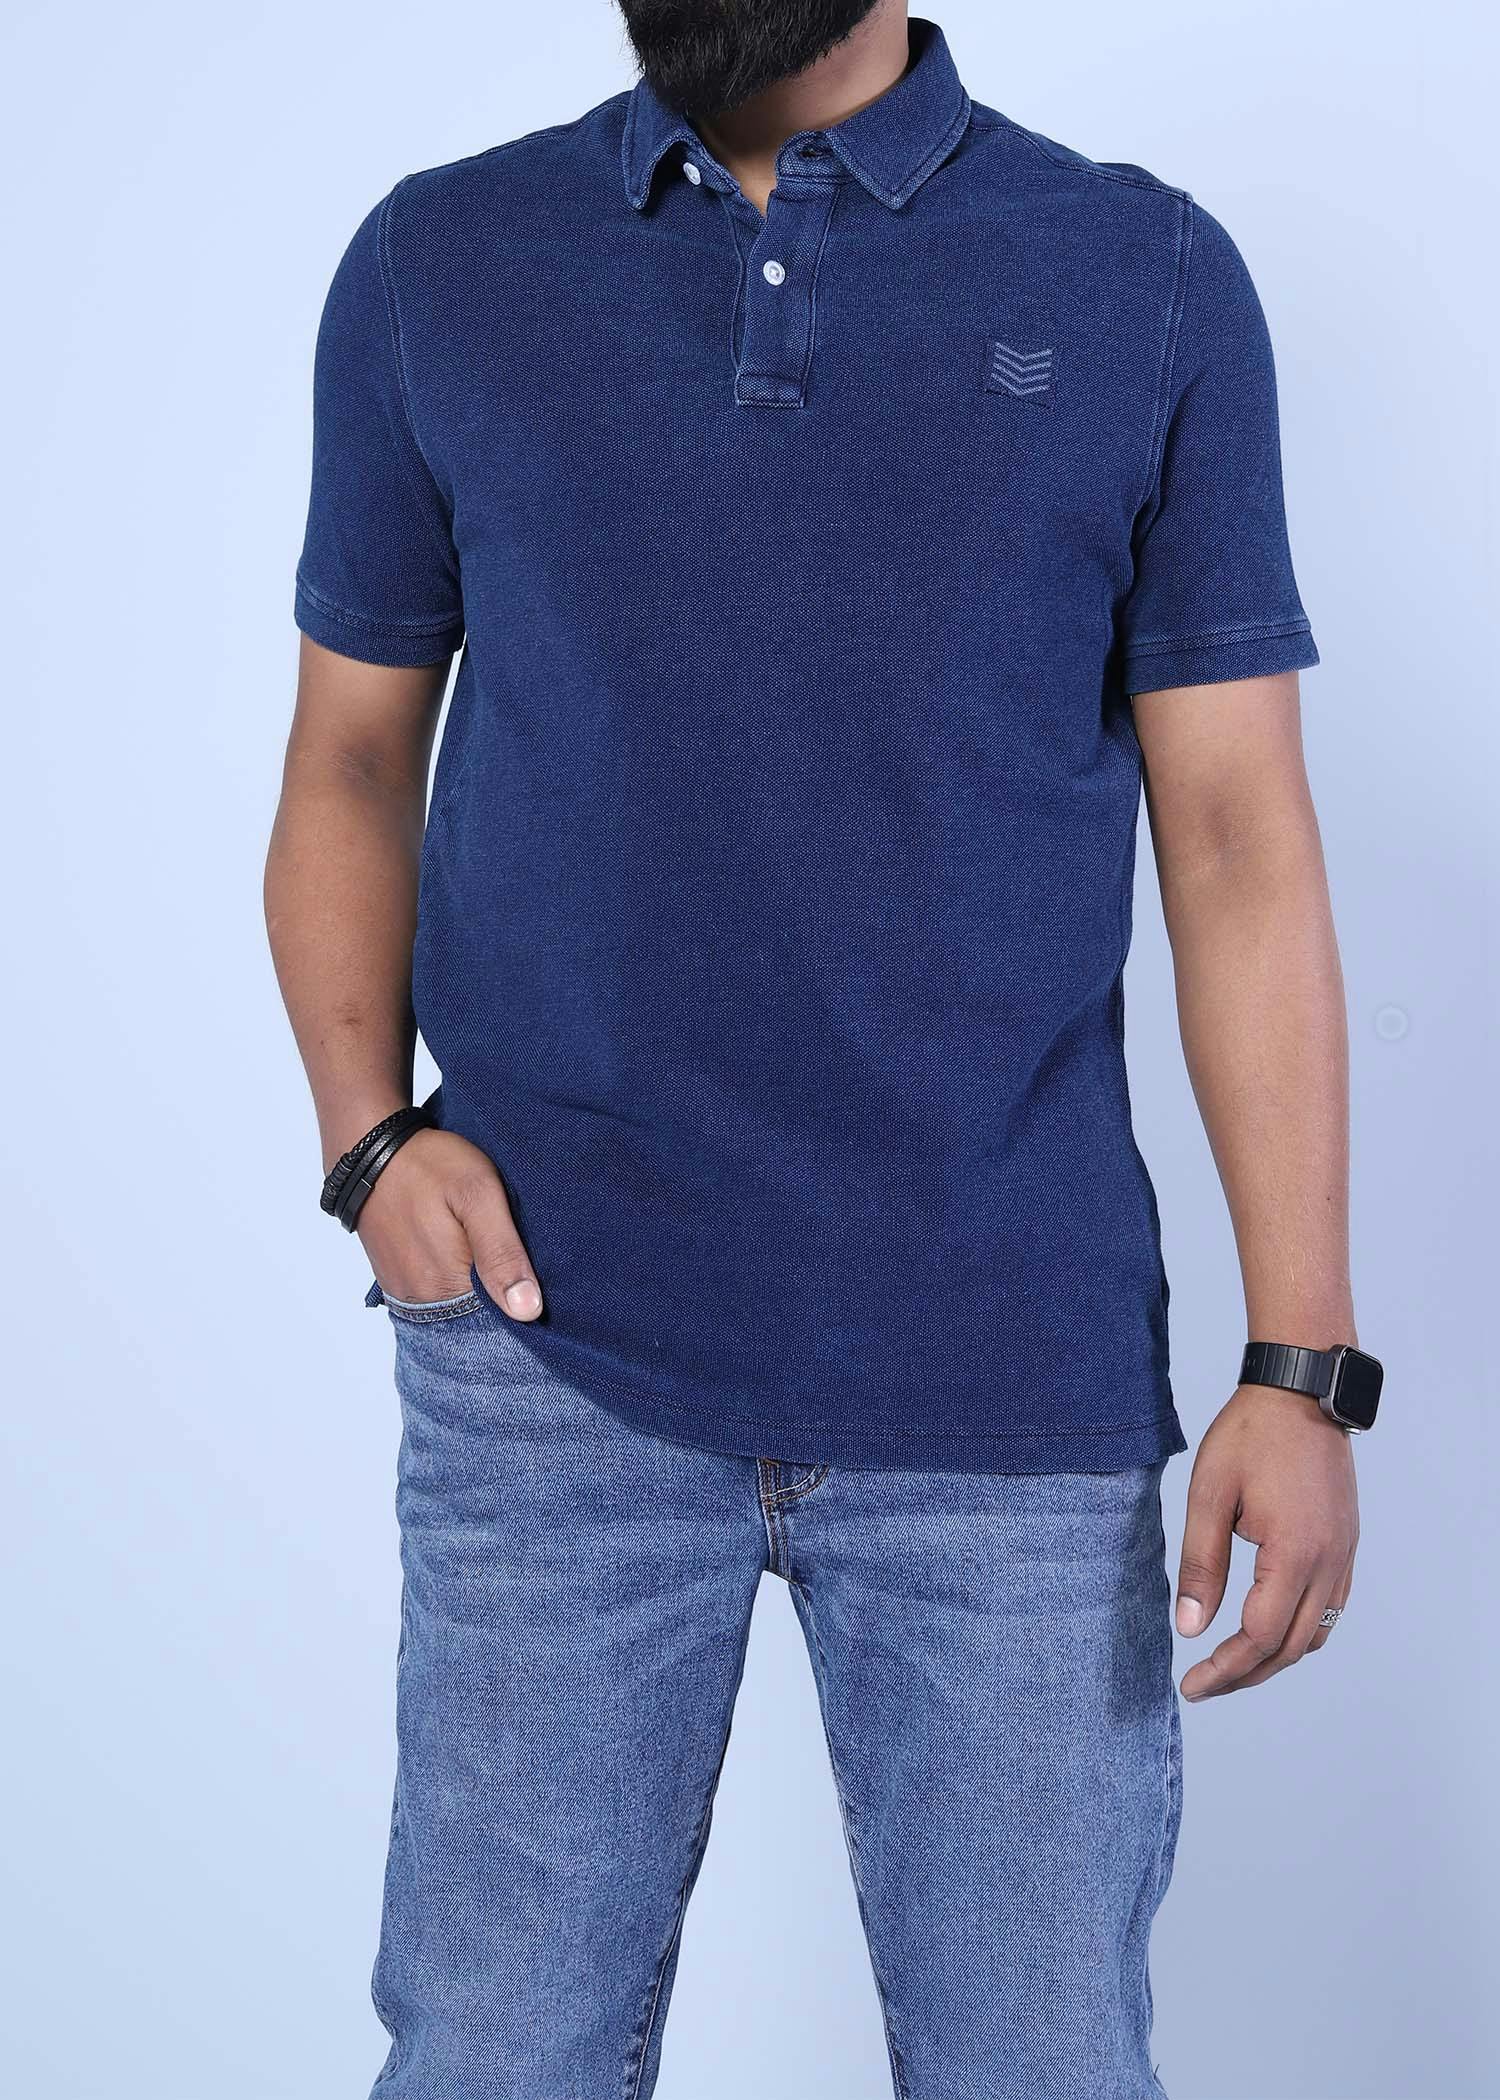 rome i polo navy half front view